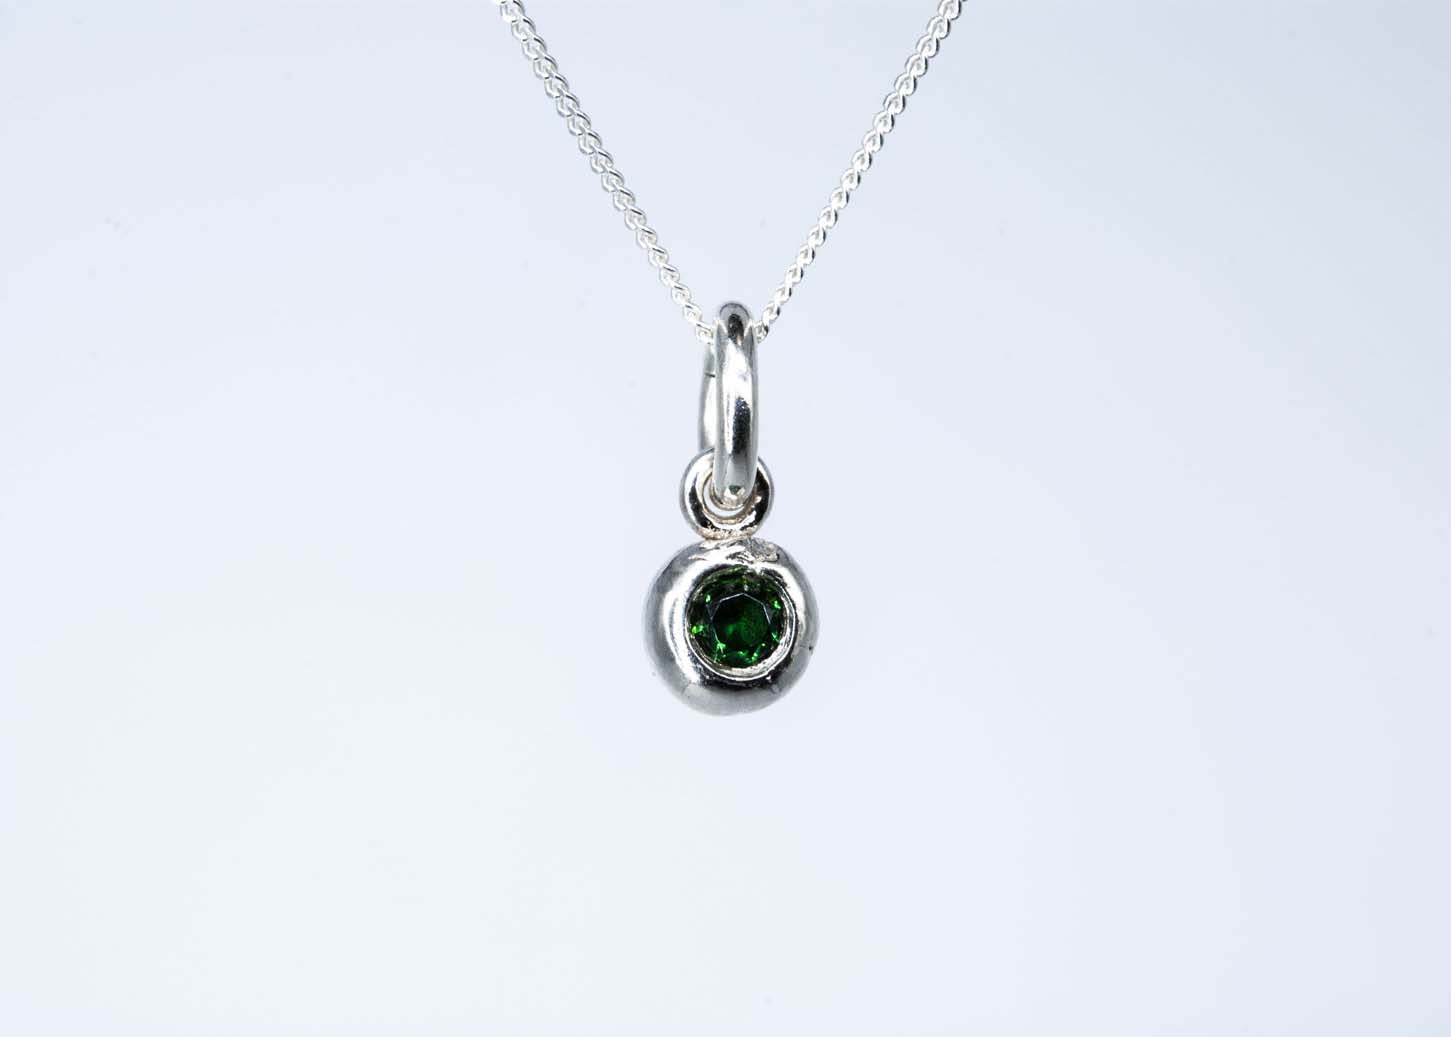 Emerald River Gem Necklace - May